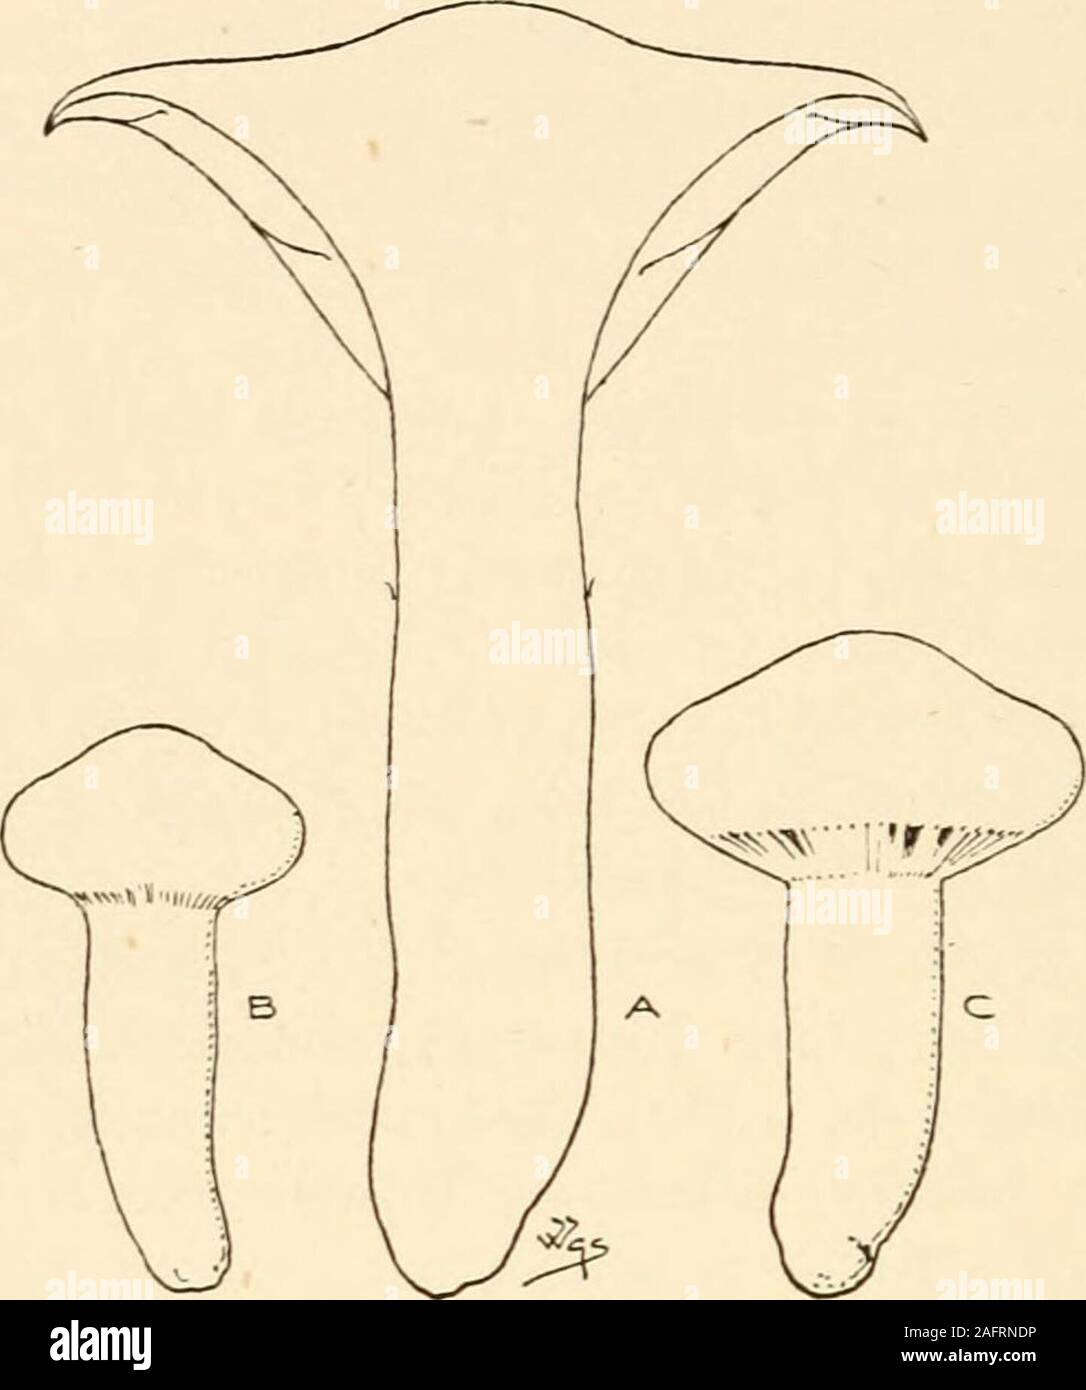 . Synopsis of the British Basidiomycetes ; a descriptive catalogue of the drawings and specimens in the Department of botany, British museum. bdistant, ochreous olive-tan to olive. Gregarious. Odour strong. Woods. Oct. if X 2§ x  in. 1167. C. faseiatus Fr. (from the fibrous-splitting stem, as if in bundles, fascice) a b. P. acutely umbonate, smooth or subsilky, brick colour or umber;mid. sepia. St. fistulose, equal, splitting longitudinally intofibres, pallid to cinnamon-fuscous, or variegated with bands ofwhite, tan and brown. G. adnate, subventricose, thin, distant,cinnamon. Woods, pine, da Stock Photo